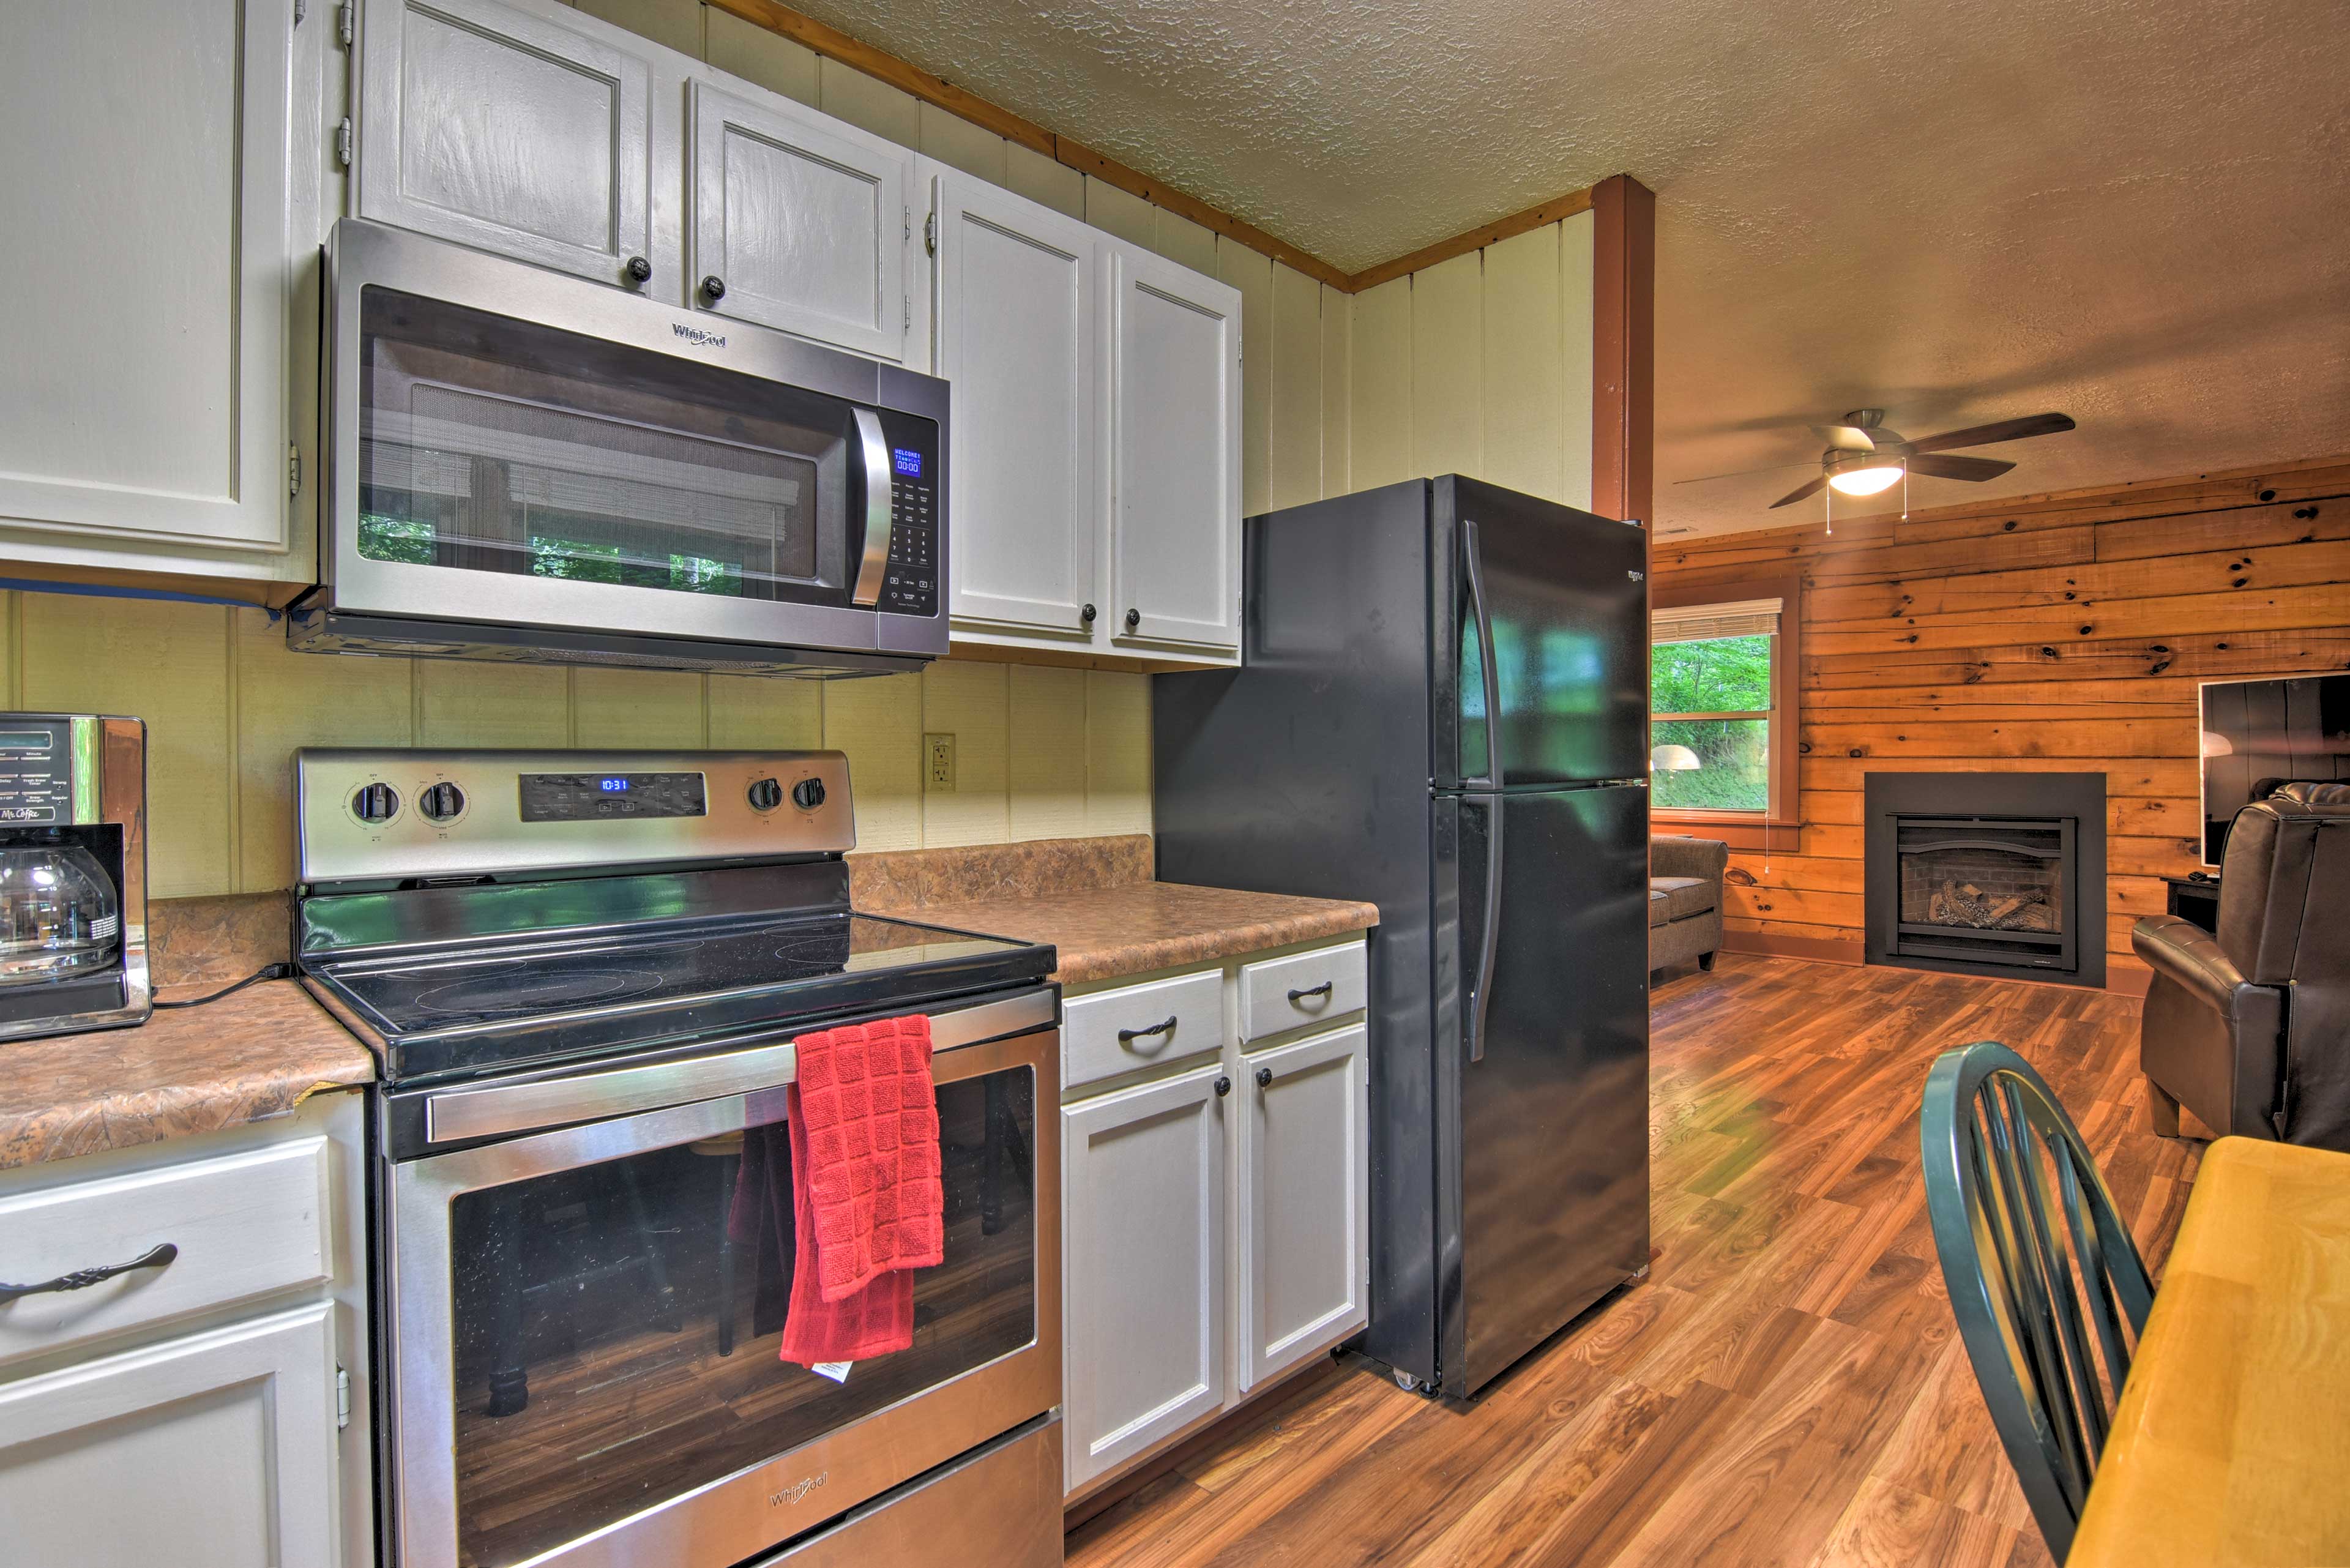 Prepare a 5-star feast with the stainless steel appliances.